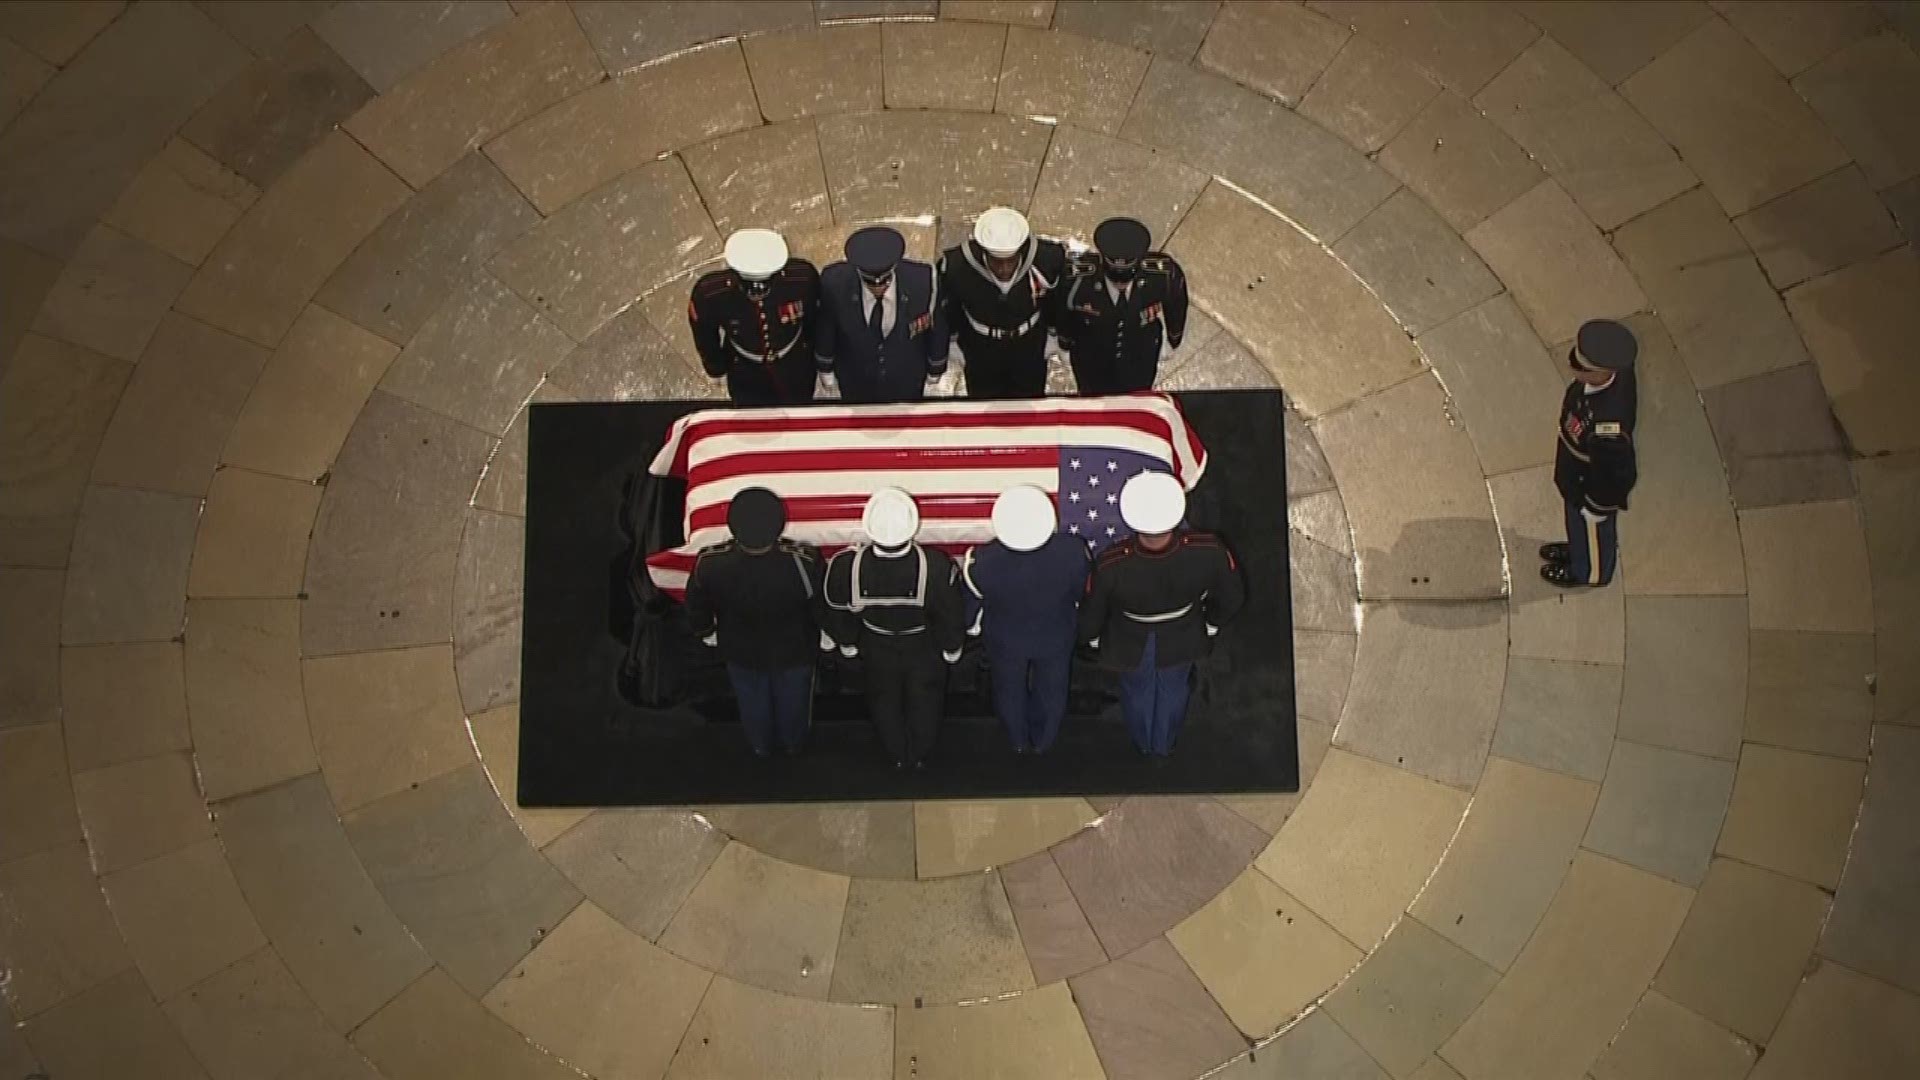 After a procession from Joint Base Andrews through Washington, a military honor guard carried the casket of former President George H.W. Bush into the rotunda of the U.S. Capitol.